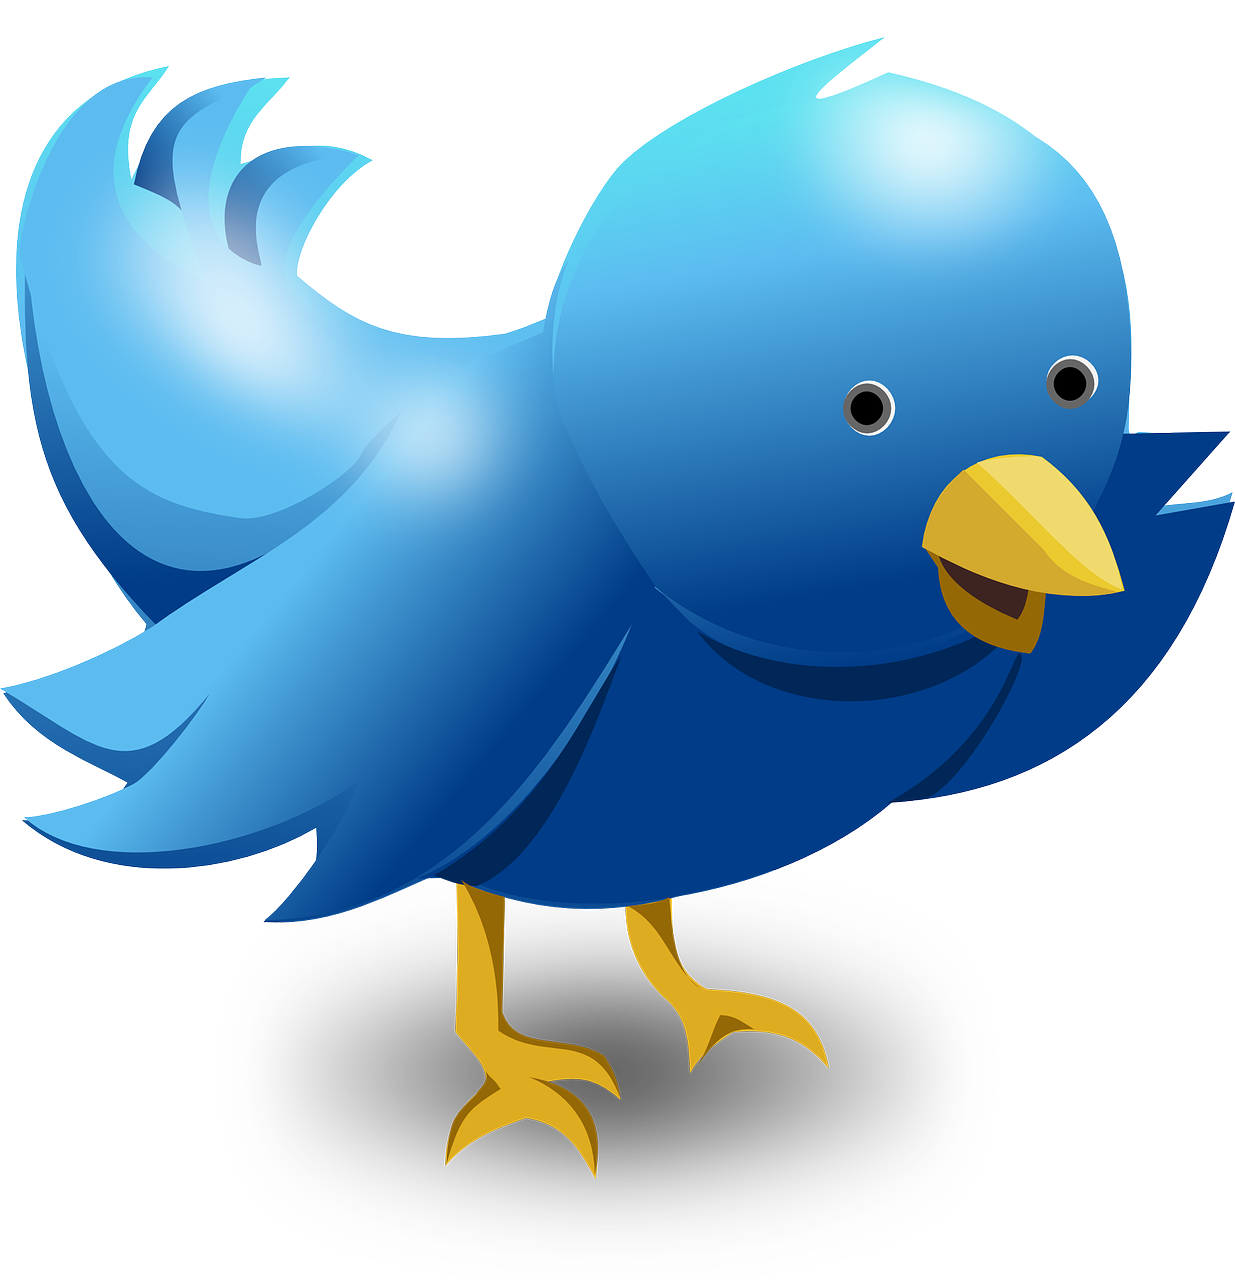 Twitter is one of the Best Social Networking Apps if you are looking for a Facebook alternative ... photo by CC user OpenClipartVectors on pixabay